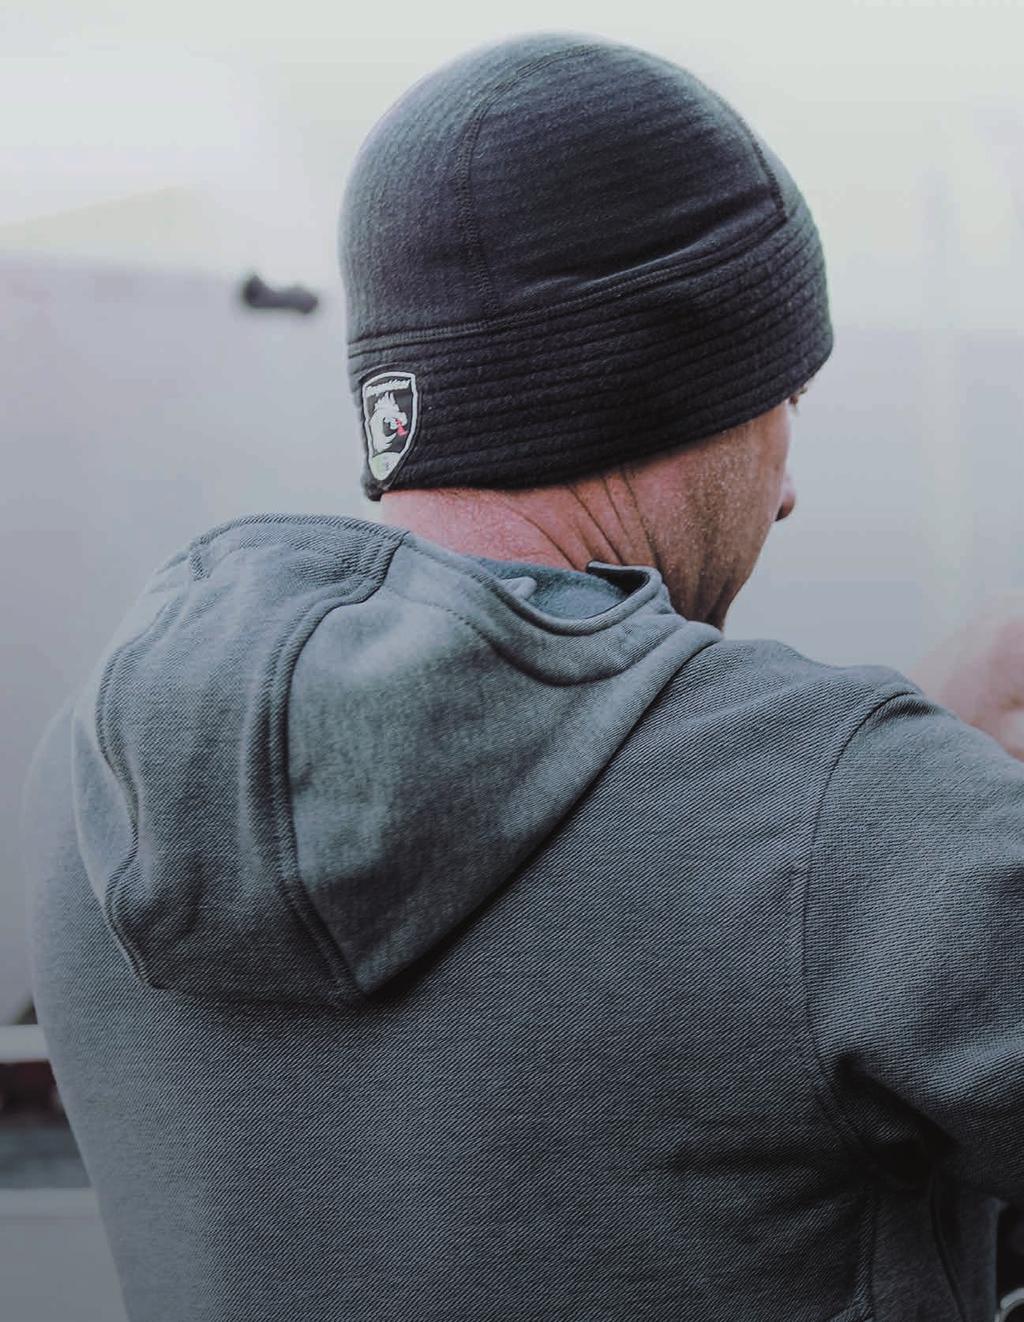 ACCESSORIES LIVEWIRE BEANIE Our Livewire Beanie provides lightweight warmth and is designed to be worn comfortably under a hard hat.